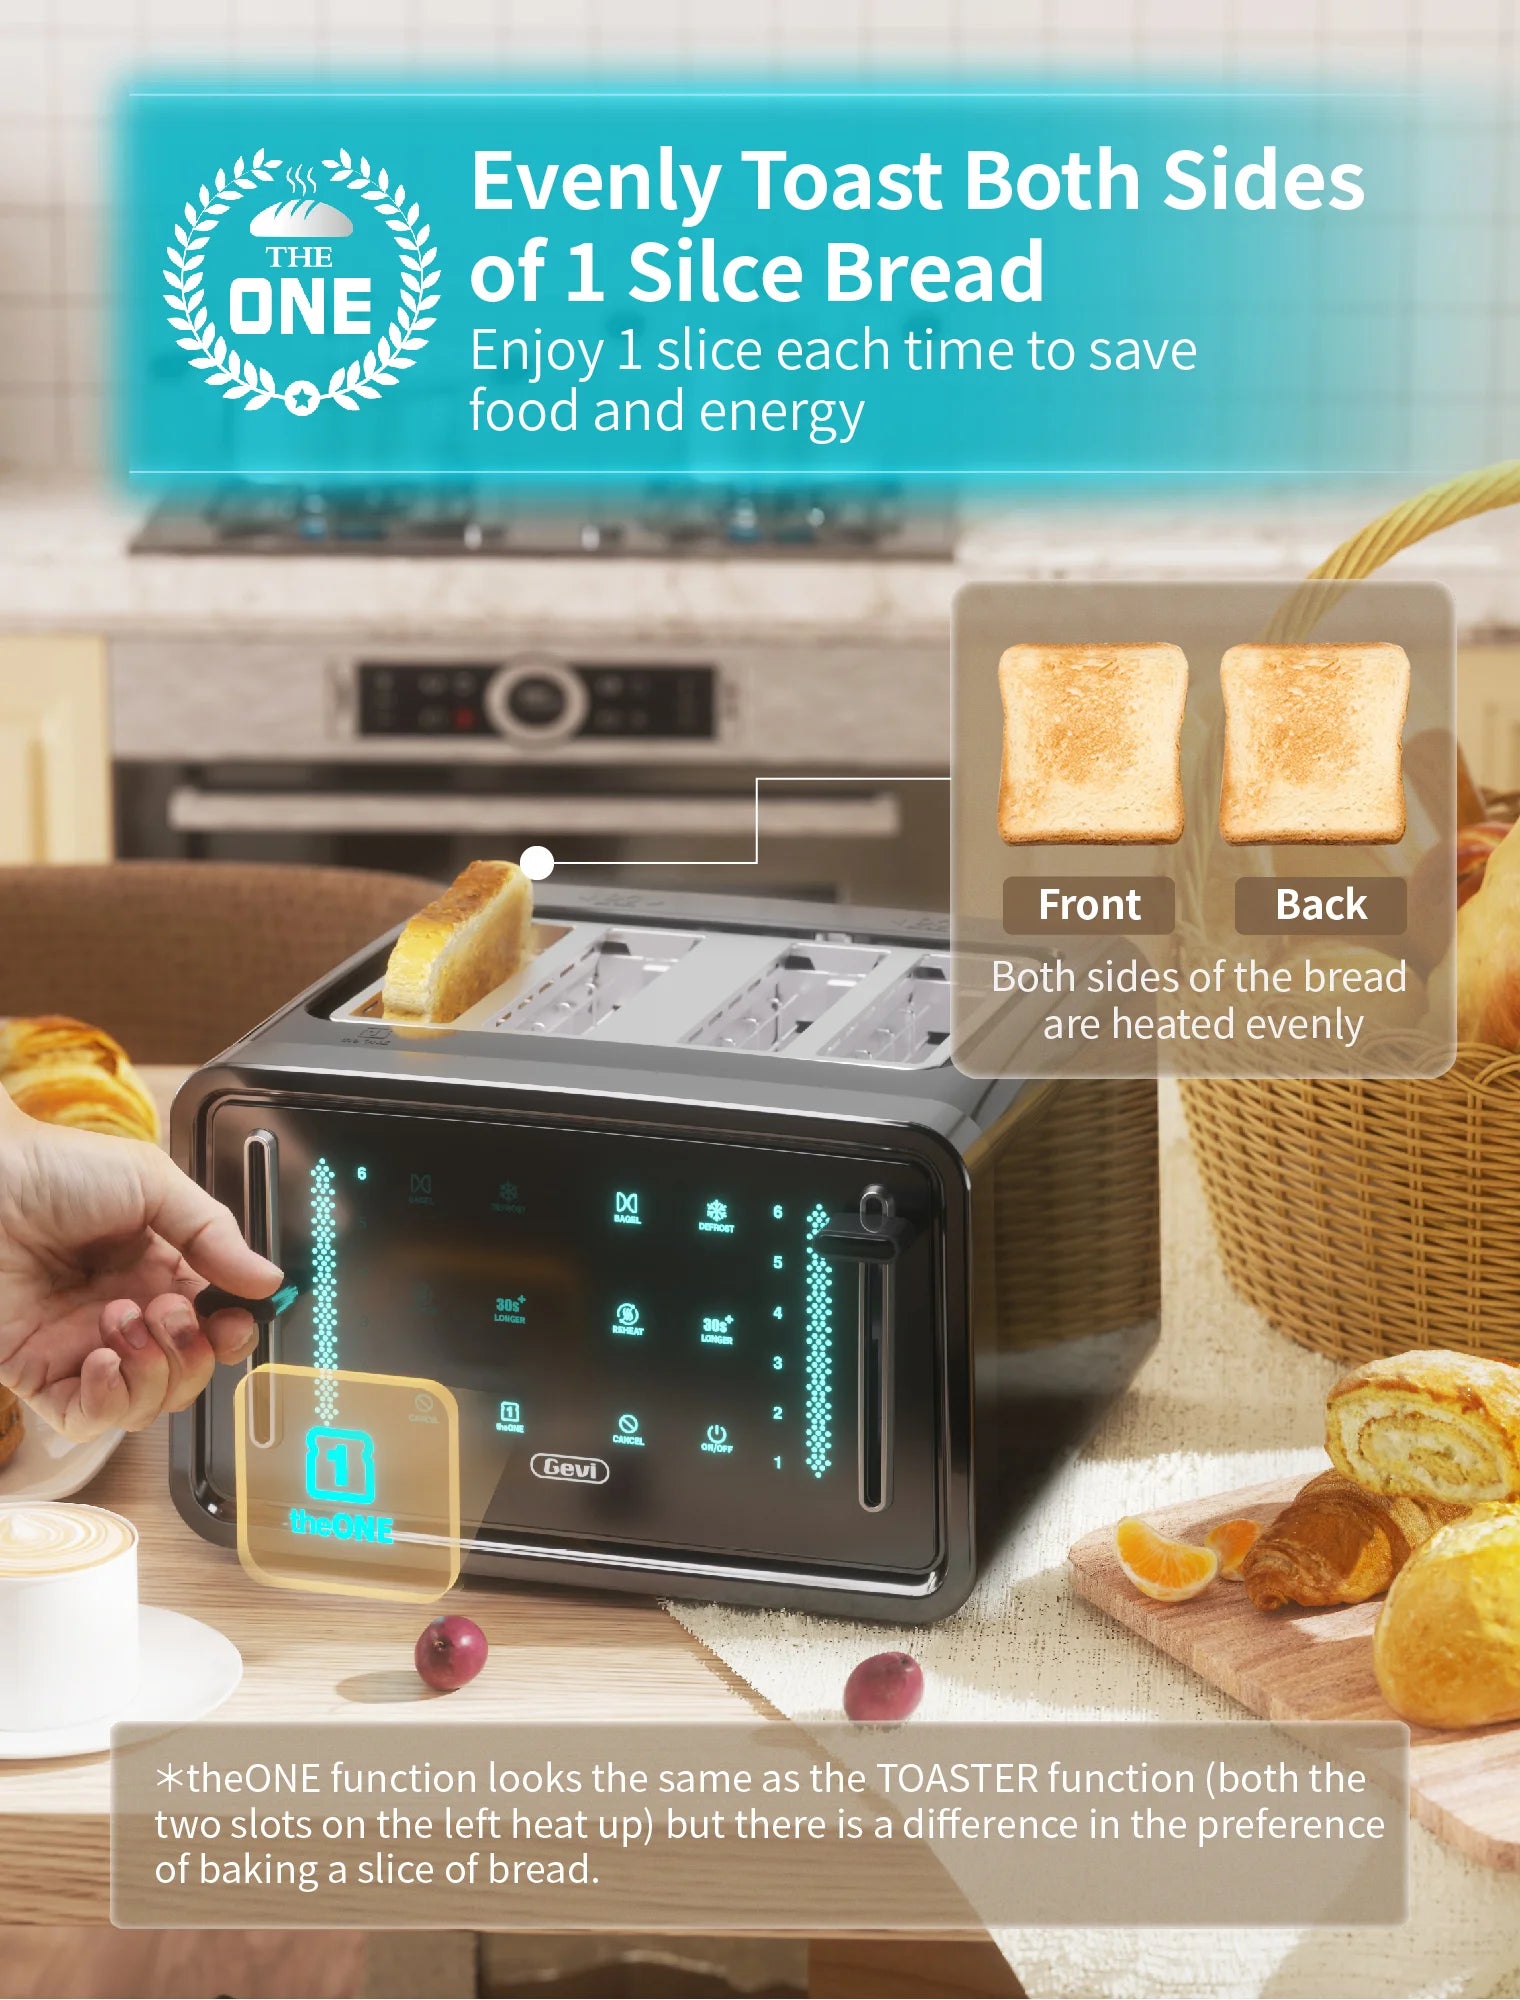 Gevi Toaster 4 Slice Toaster LED Digital Touch Screen Extra-Wide